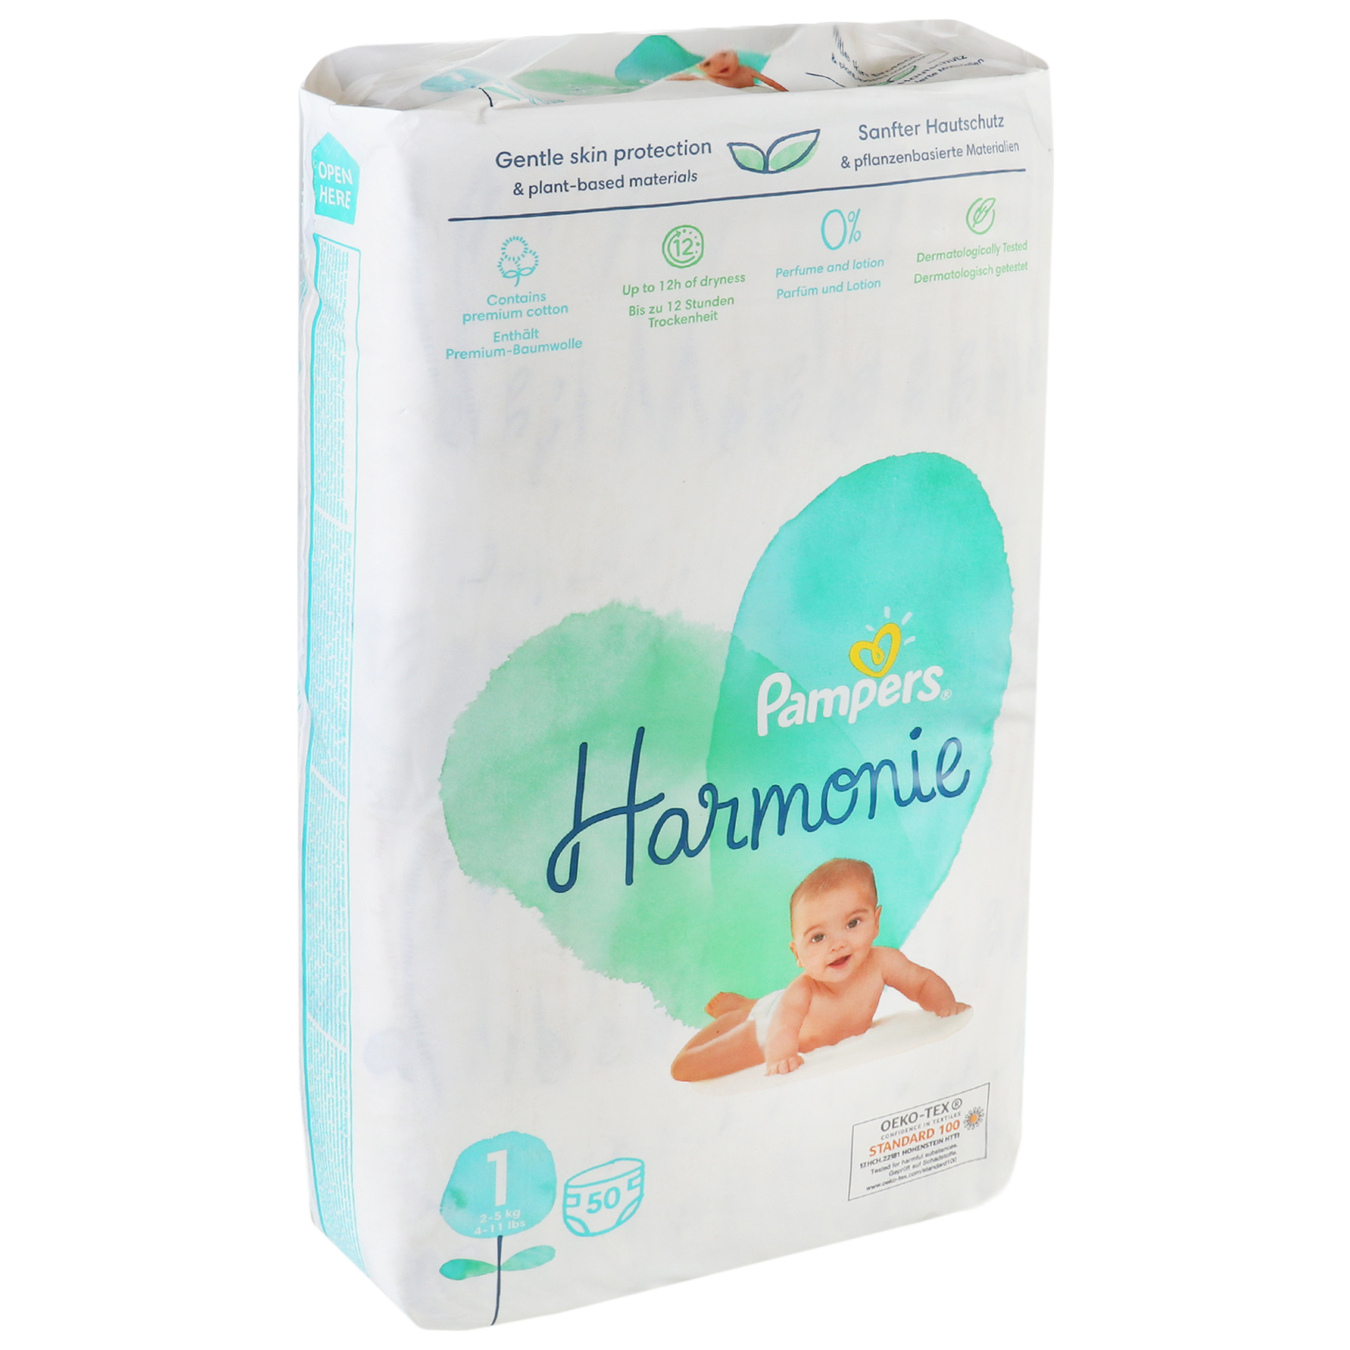 Baby diapers Pampers Economy Harmonie Newborn disposable 2-5 kg 50 pcs 2